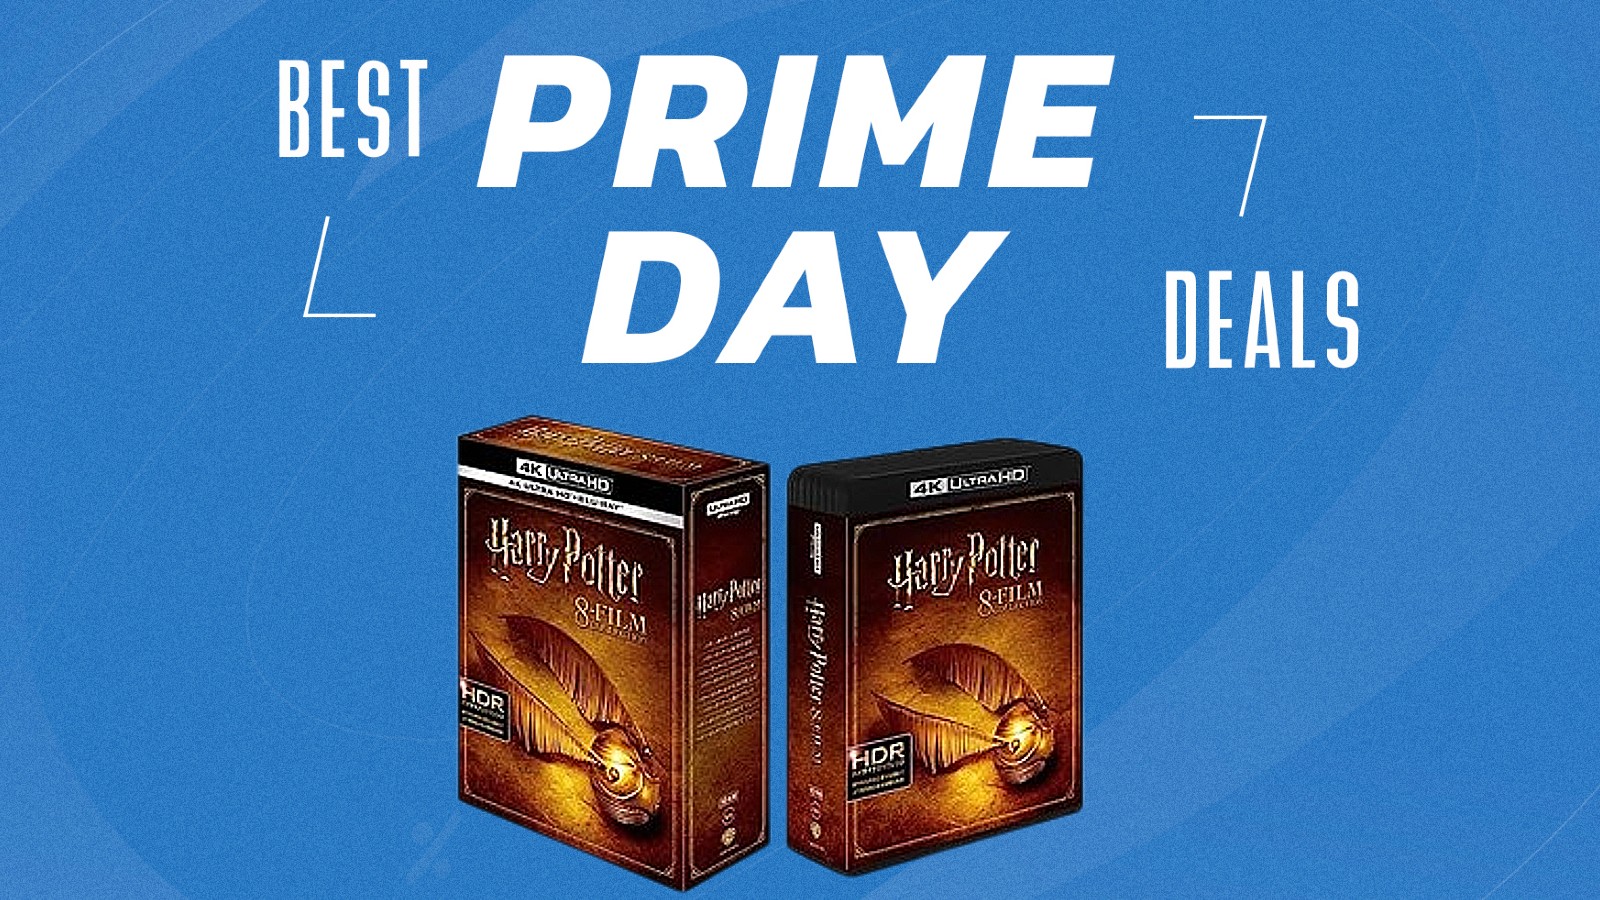 The 'Harry Potter' Black Friday Blu-ray Box Set Deal is Better Than Ever